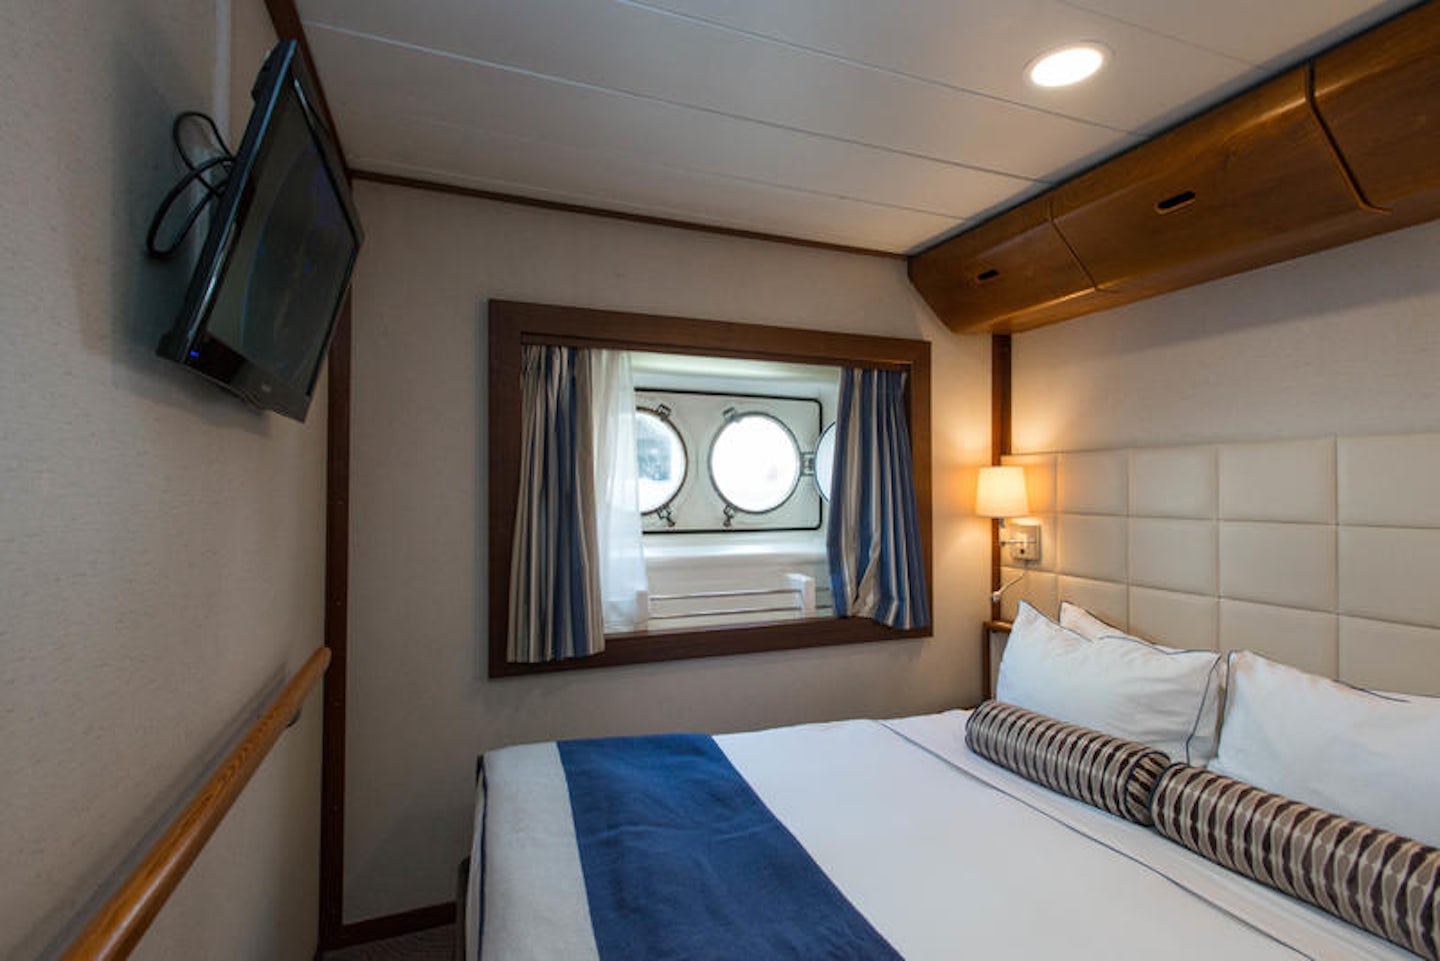 The Deluxe Oceanview Cabin (Category BX) on Wind Star